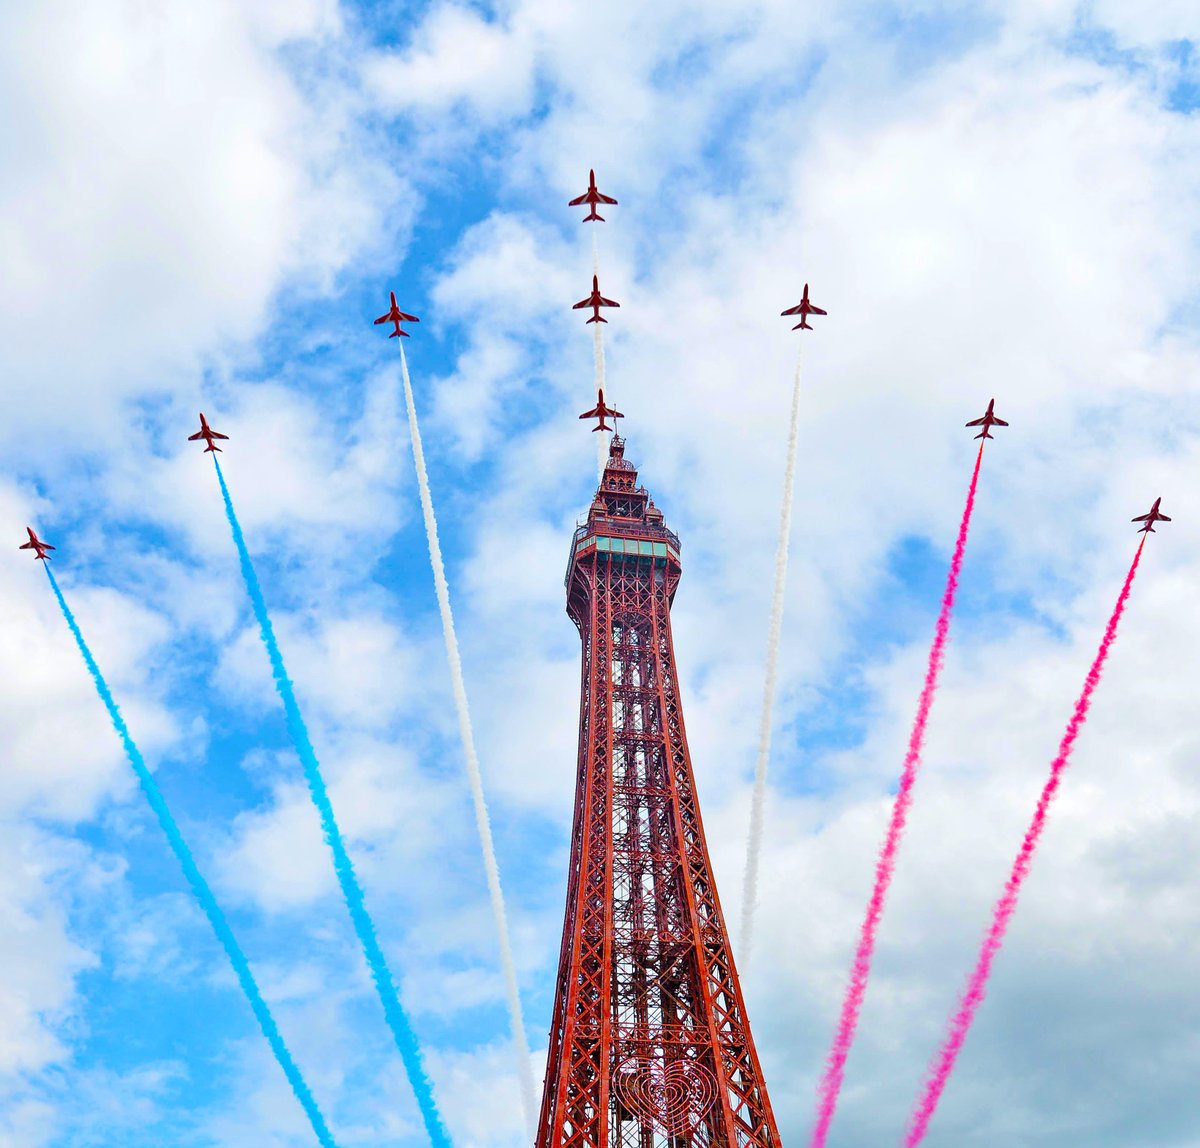 Today marks 130 years of Blackpool Tower 🙌🎉

What memories do you have of the tower from over the years? 🤔